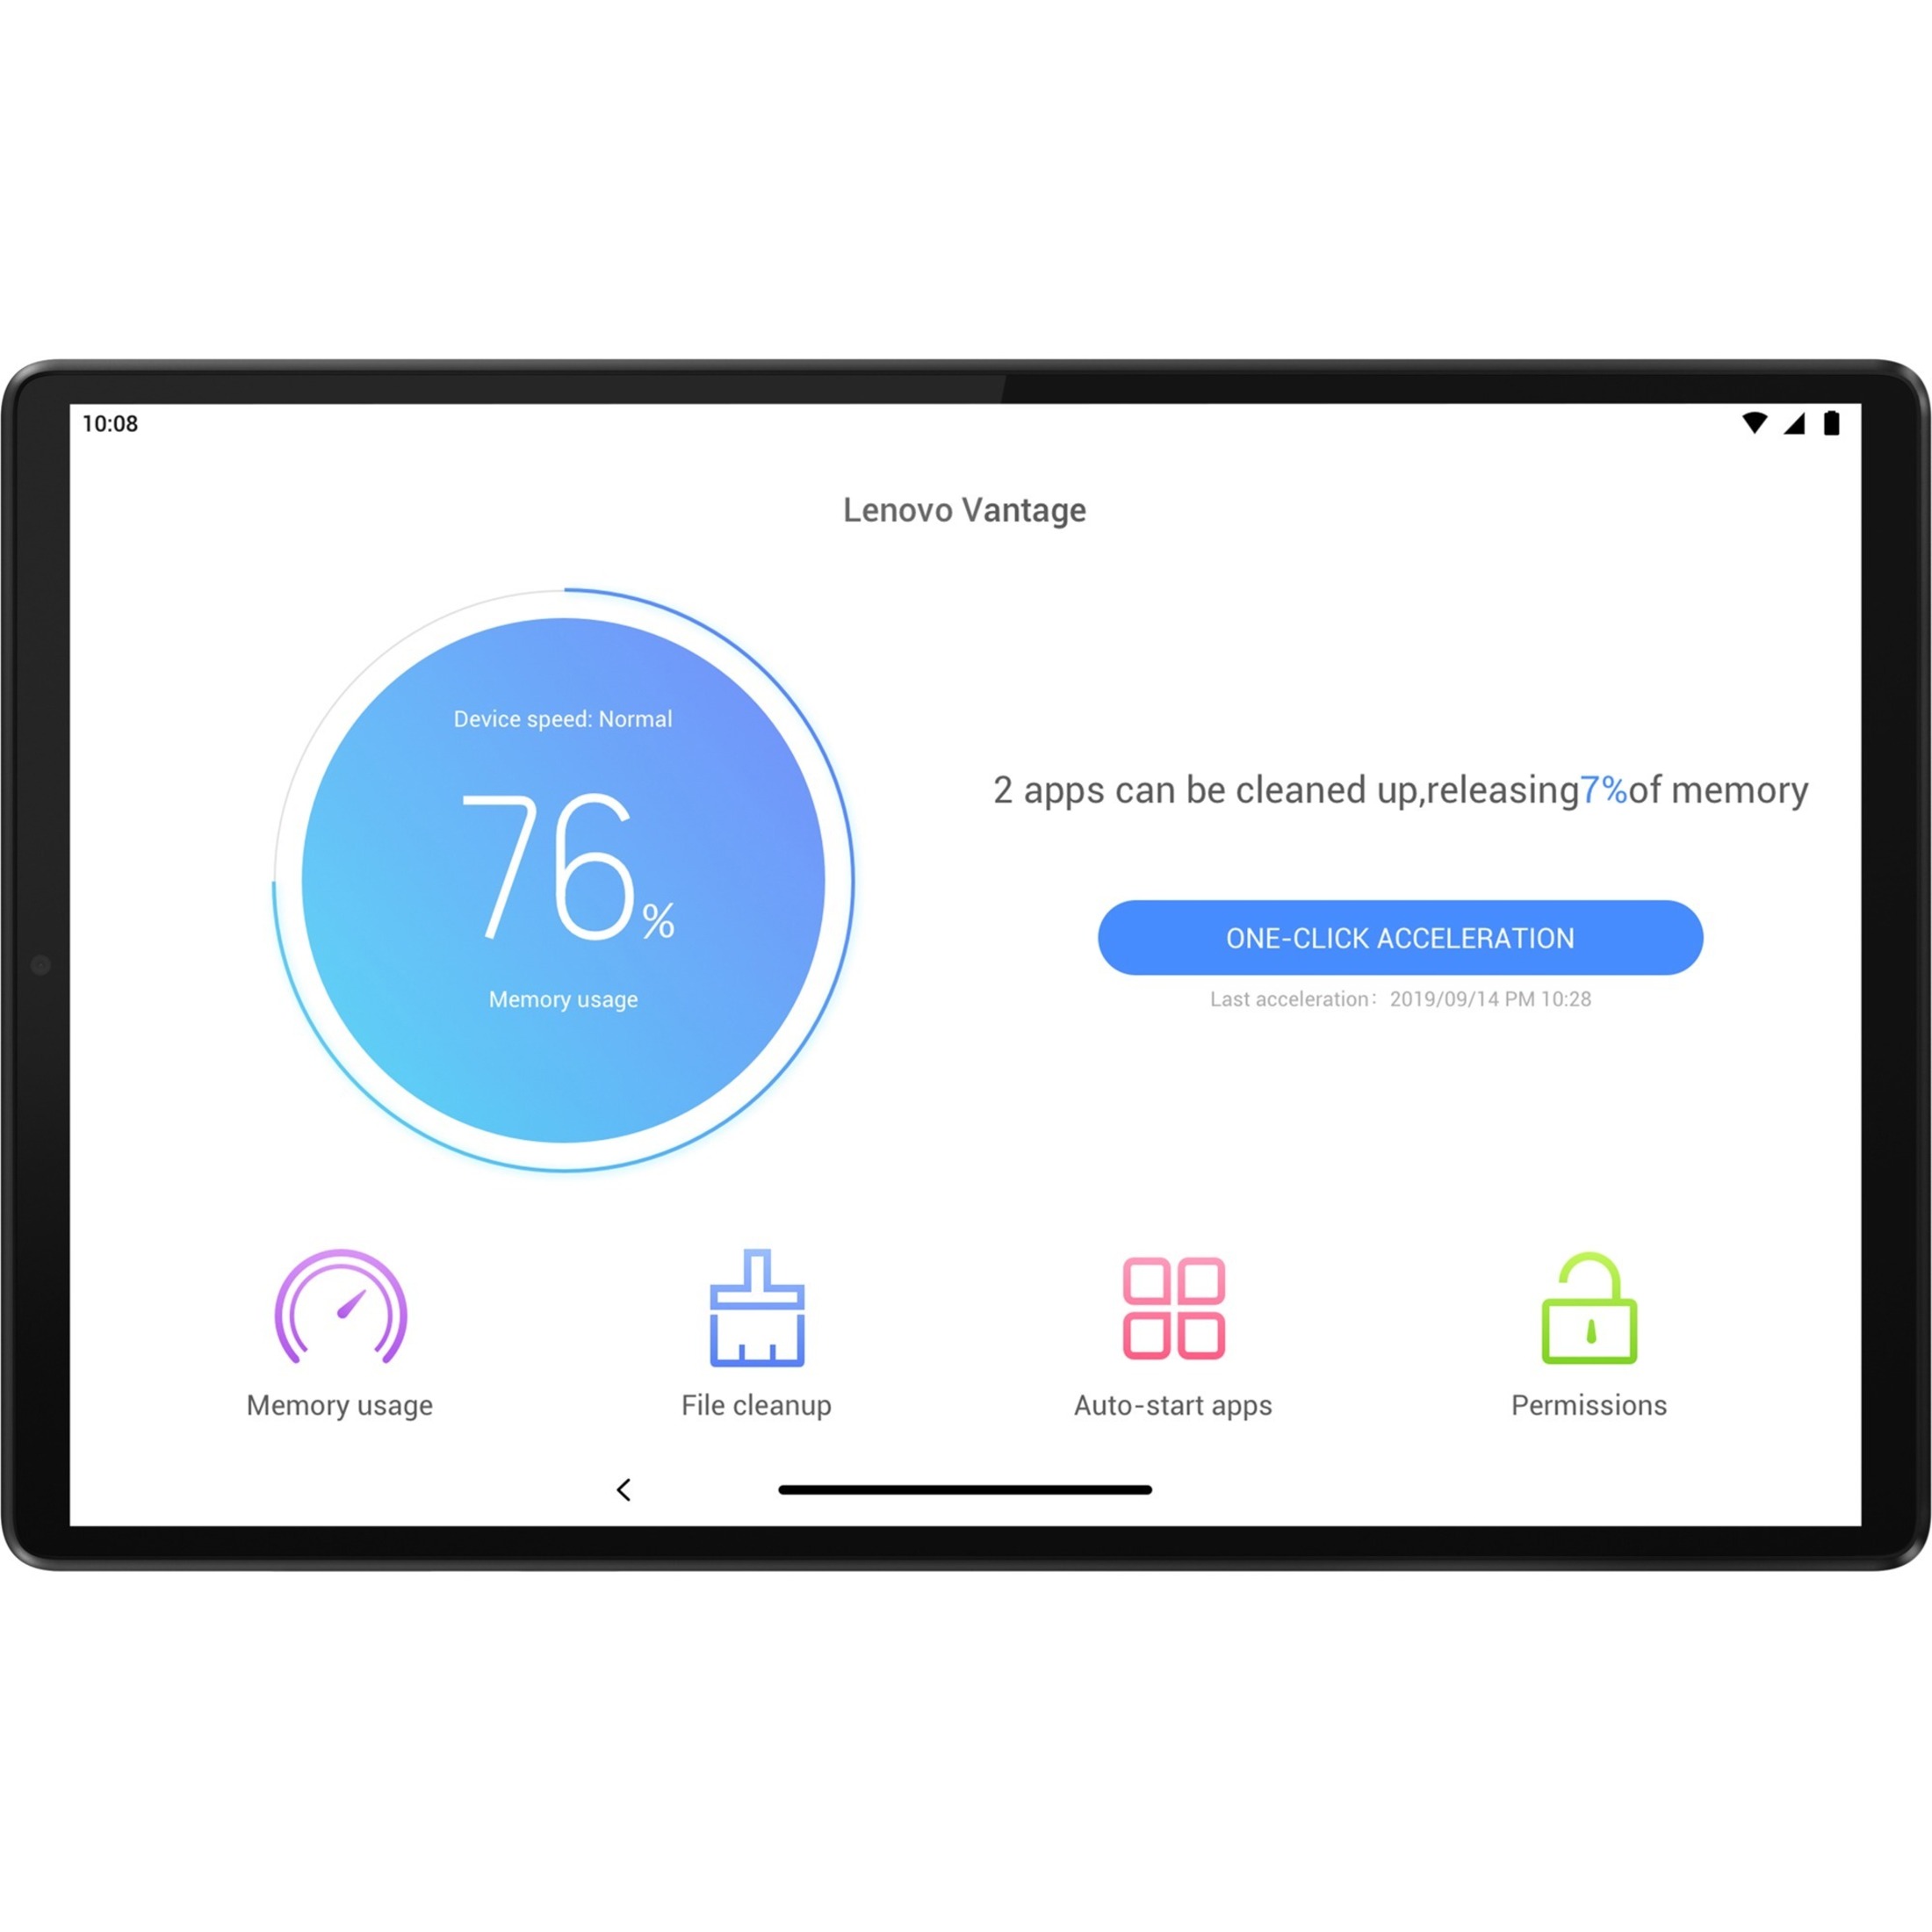 Lenovo Tab M10 10.3" Tablet - MediaTek Helio P22T - 4GB - 64GB FHD Plus with the Smart Charging Station - Android 9.0 (Pie) - image 18 of 33